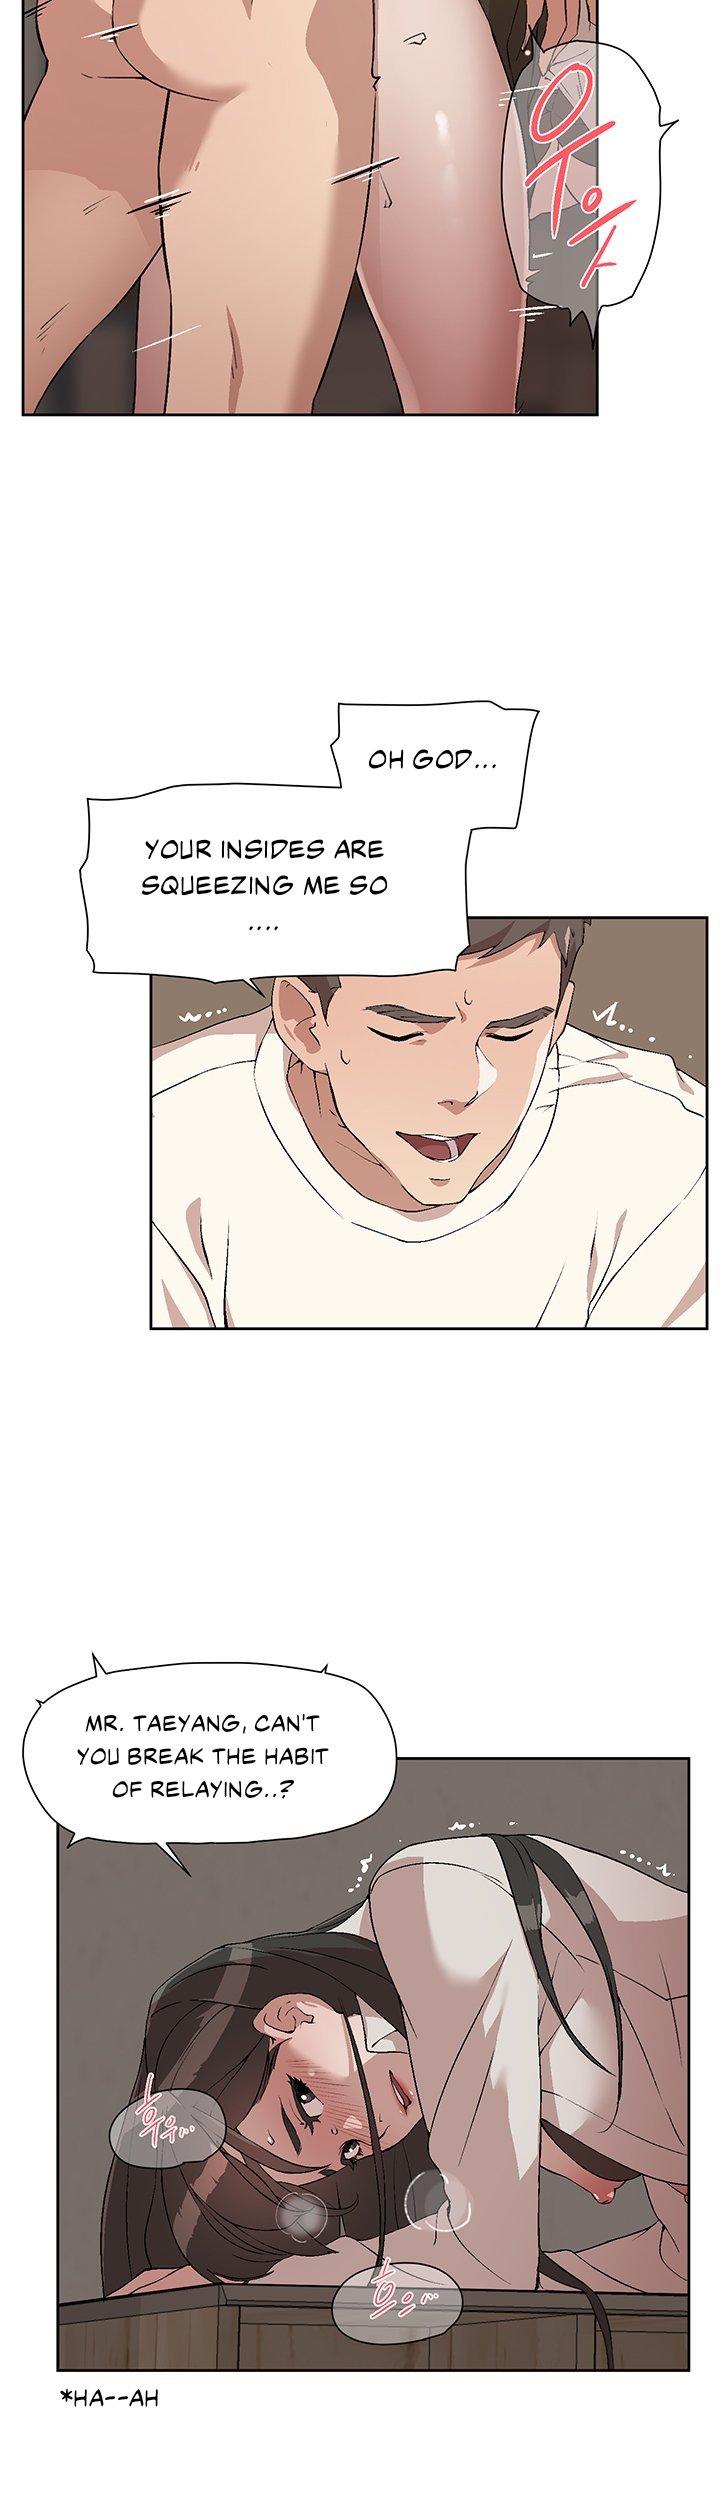 Tats Everything about Best Friend Manhwa 01-13 Big Cocks - Page 10